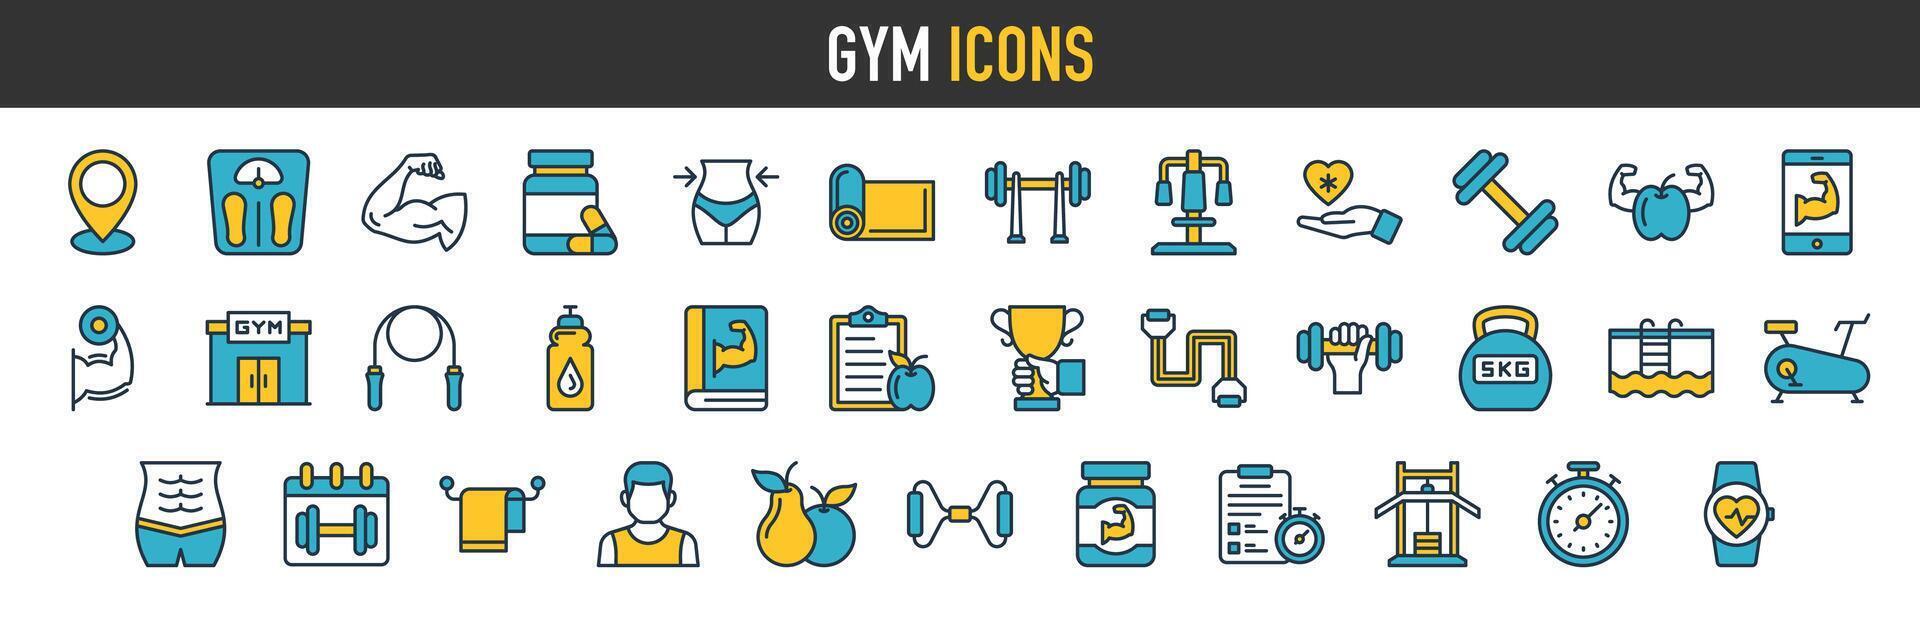 Gym icon set. Containing healthy lifestyle, fitness, weight training, body care and workout or exercise equipment icons. Solid icons vector illustration.